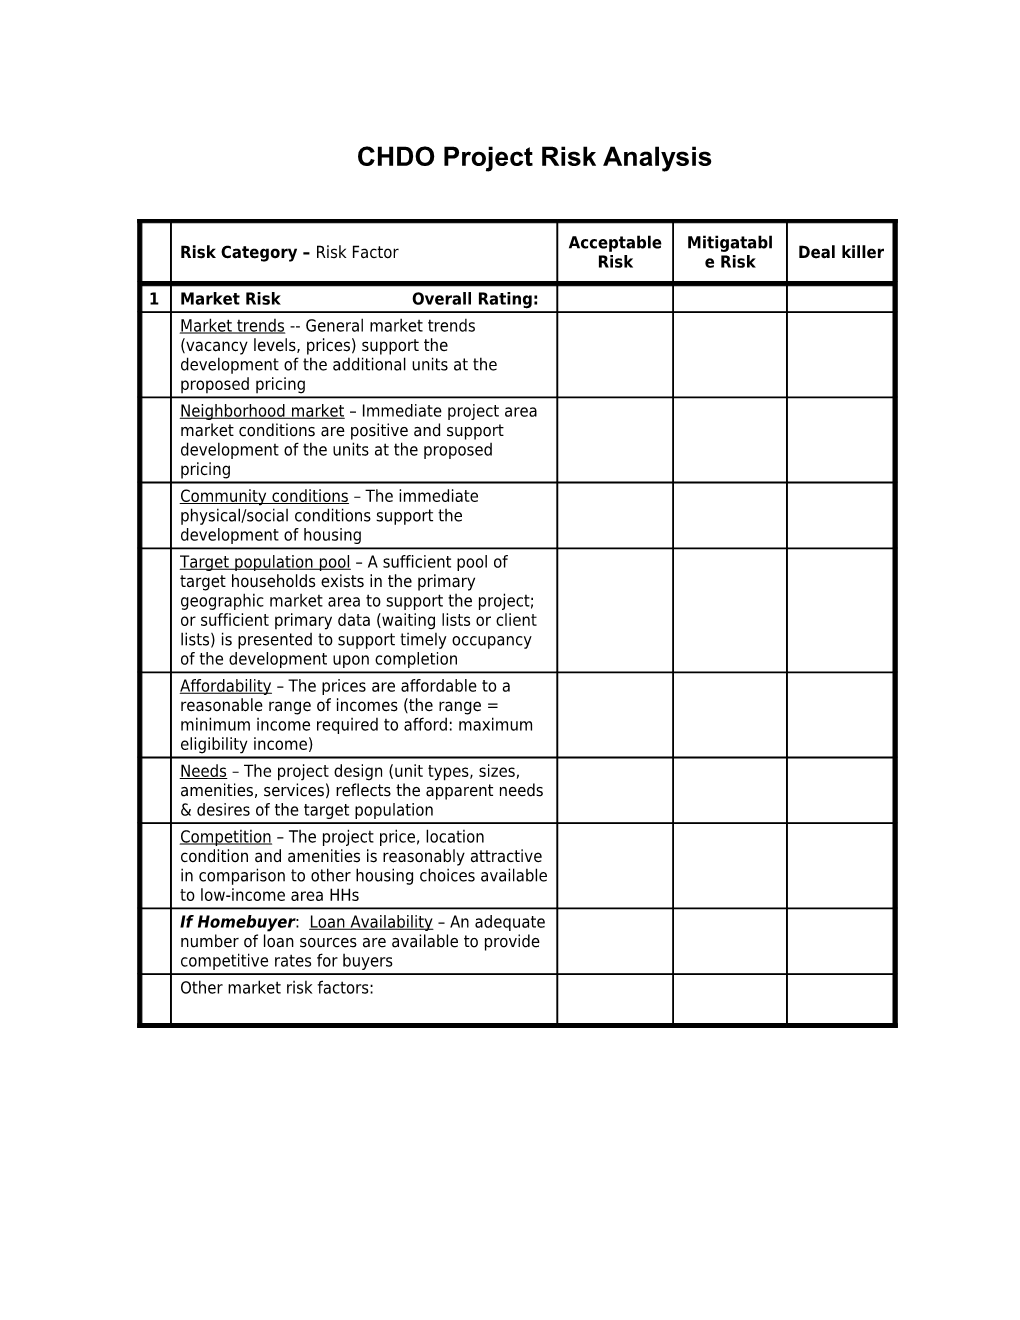 CHDO Project Risk Analysis